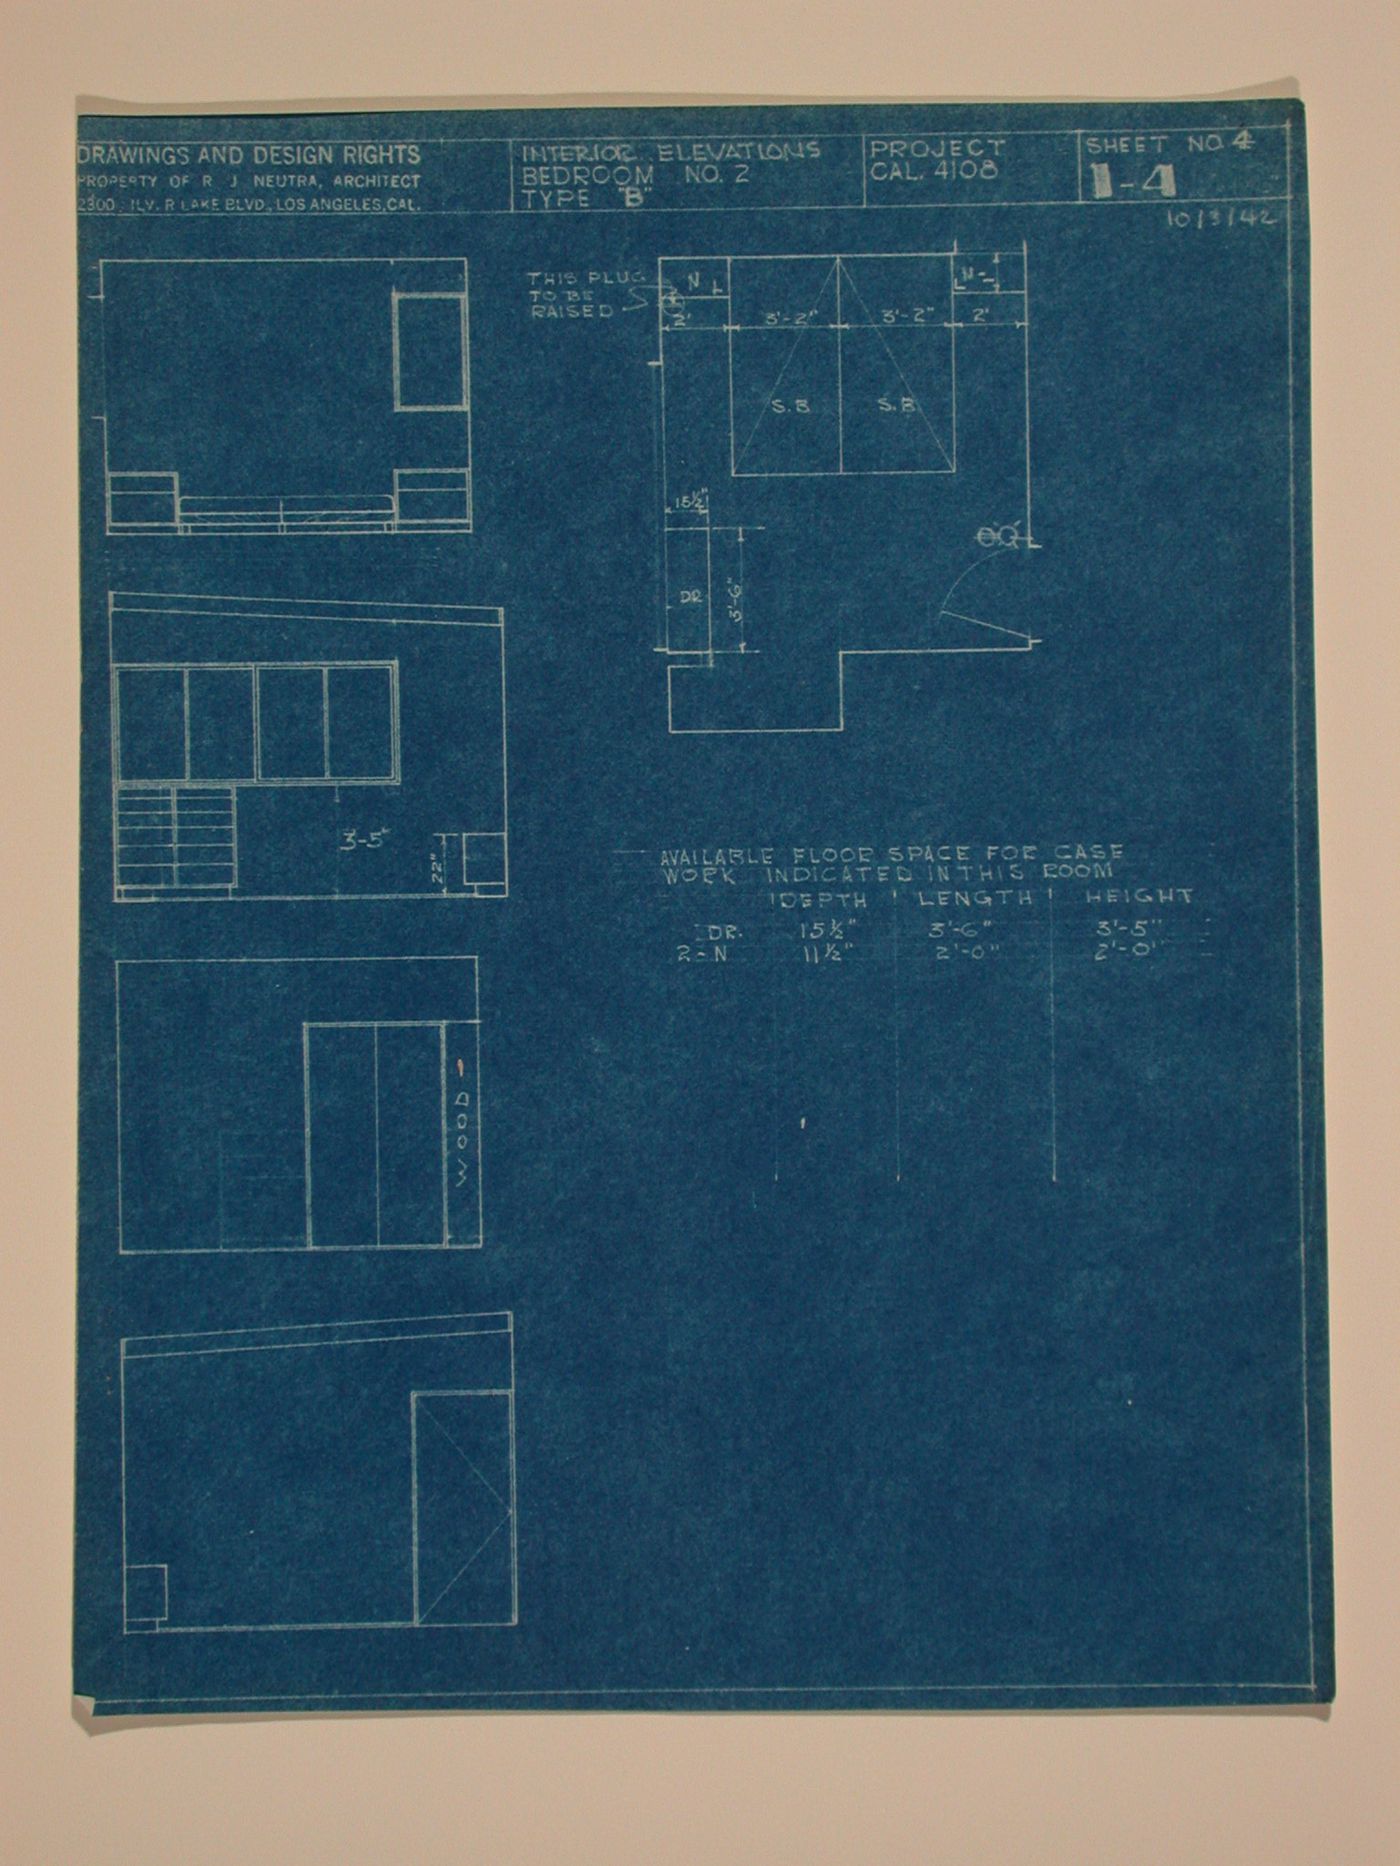 Interior elevations and plan for bedroom no. 2 type "B"